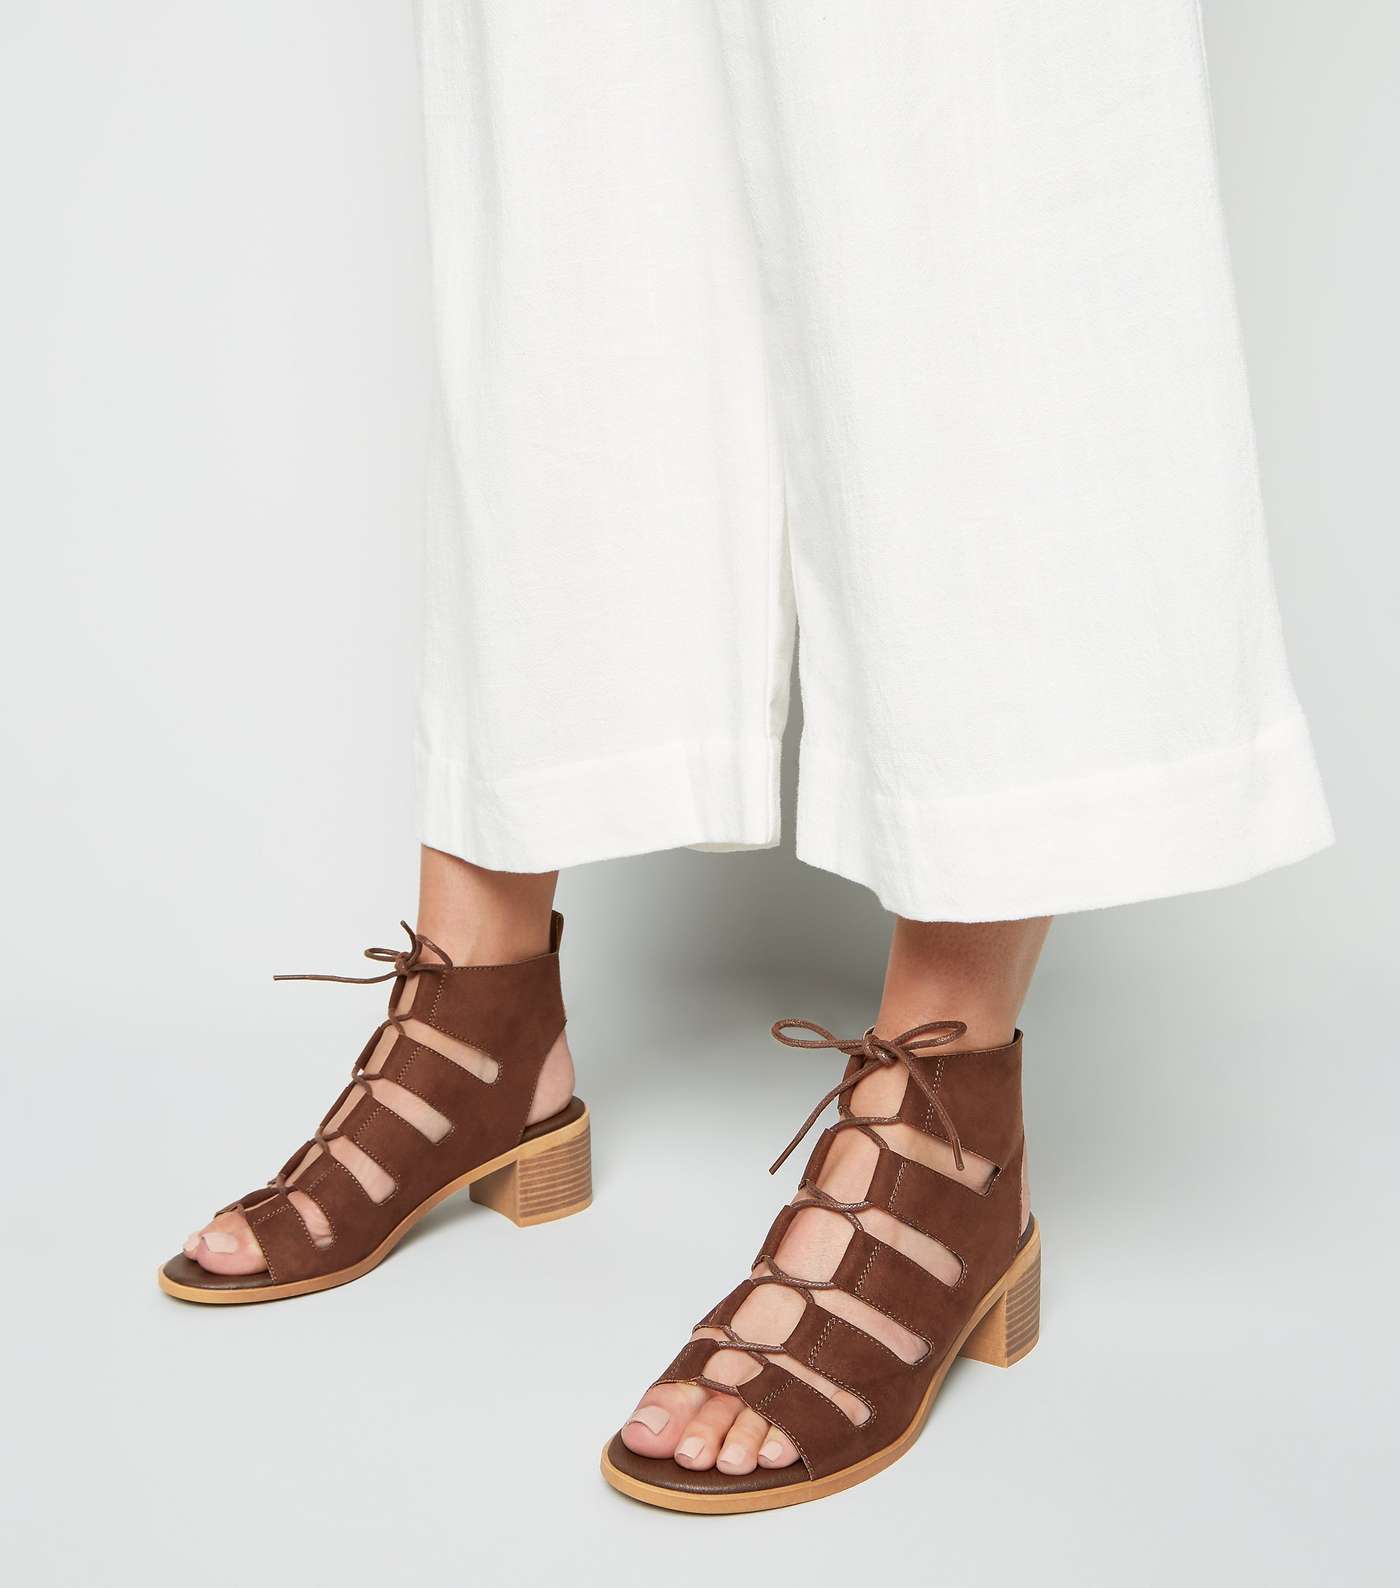 Brown Ghillie Lace Up Low Heel Sandals Image 2